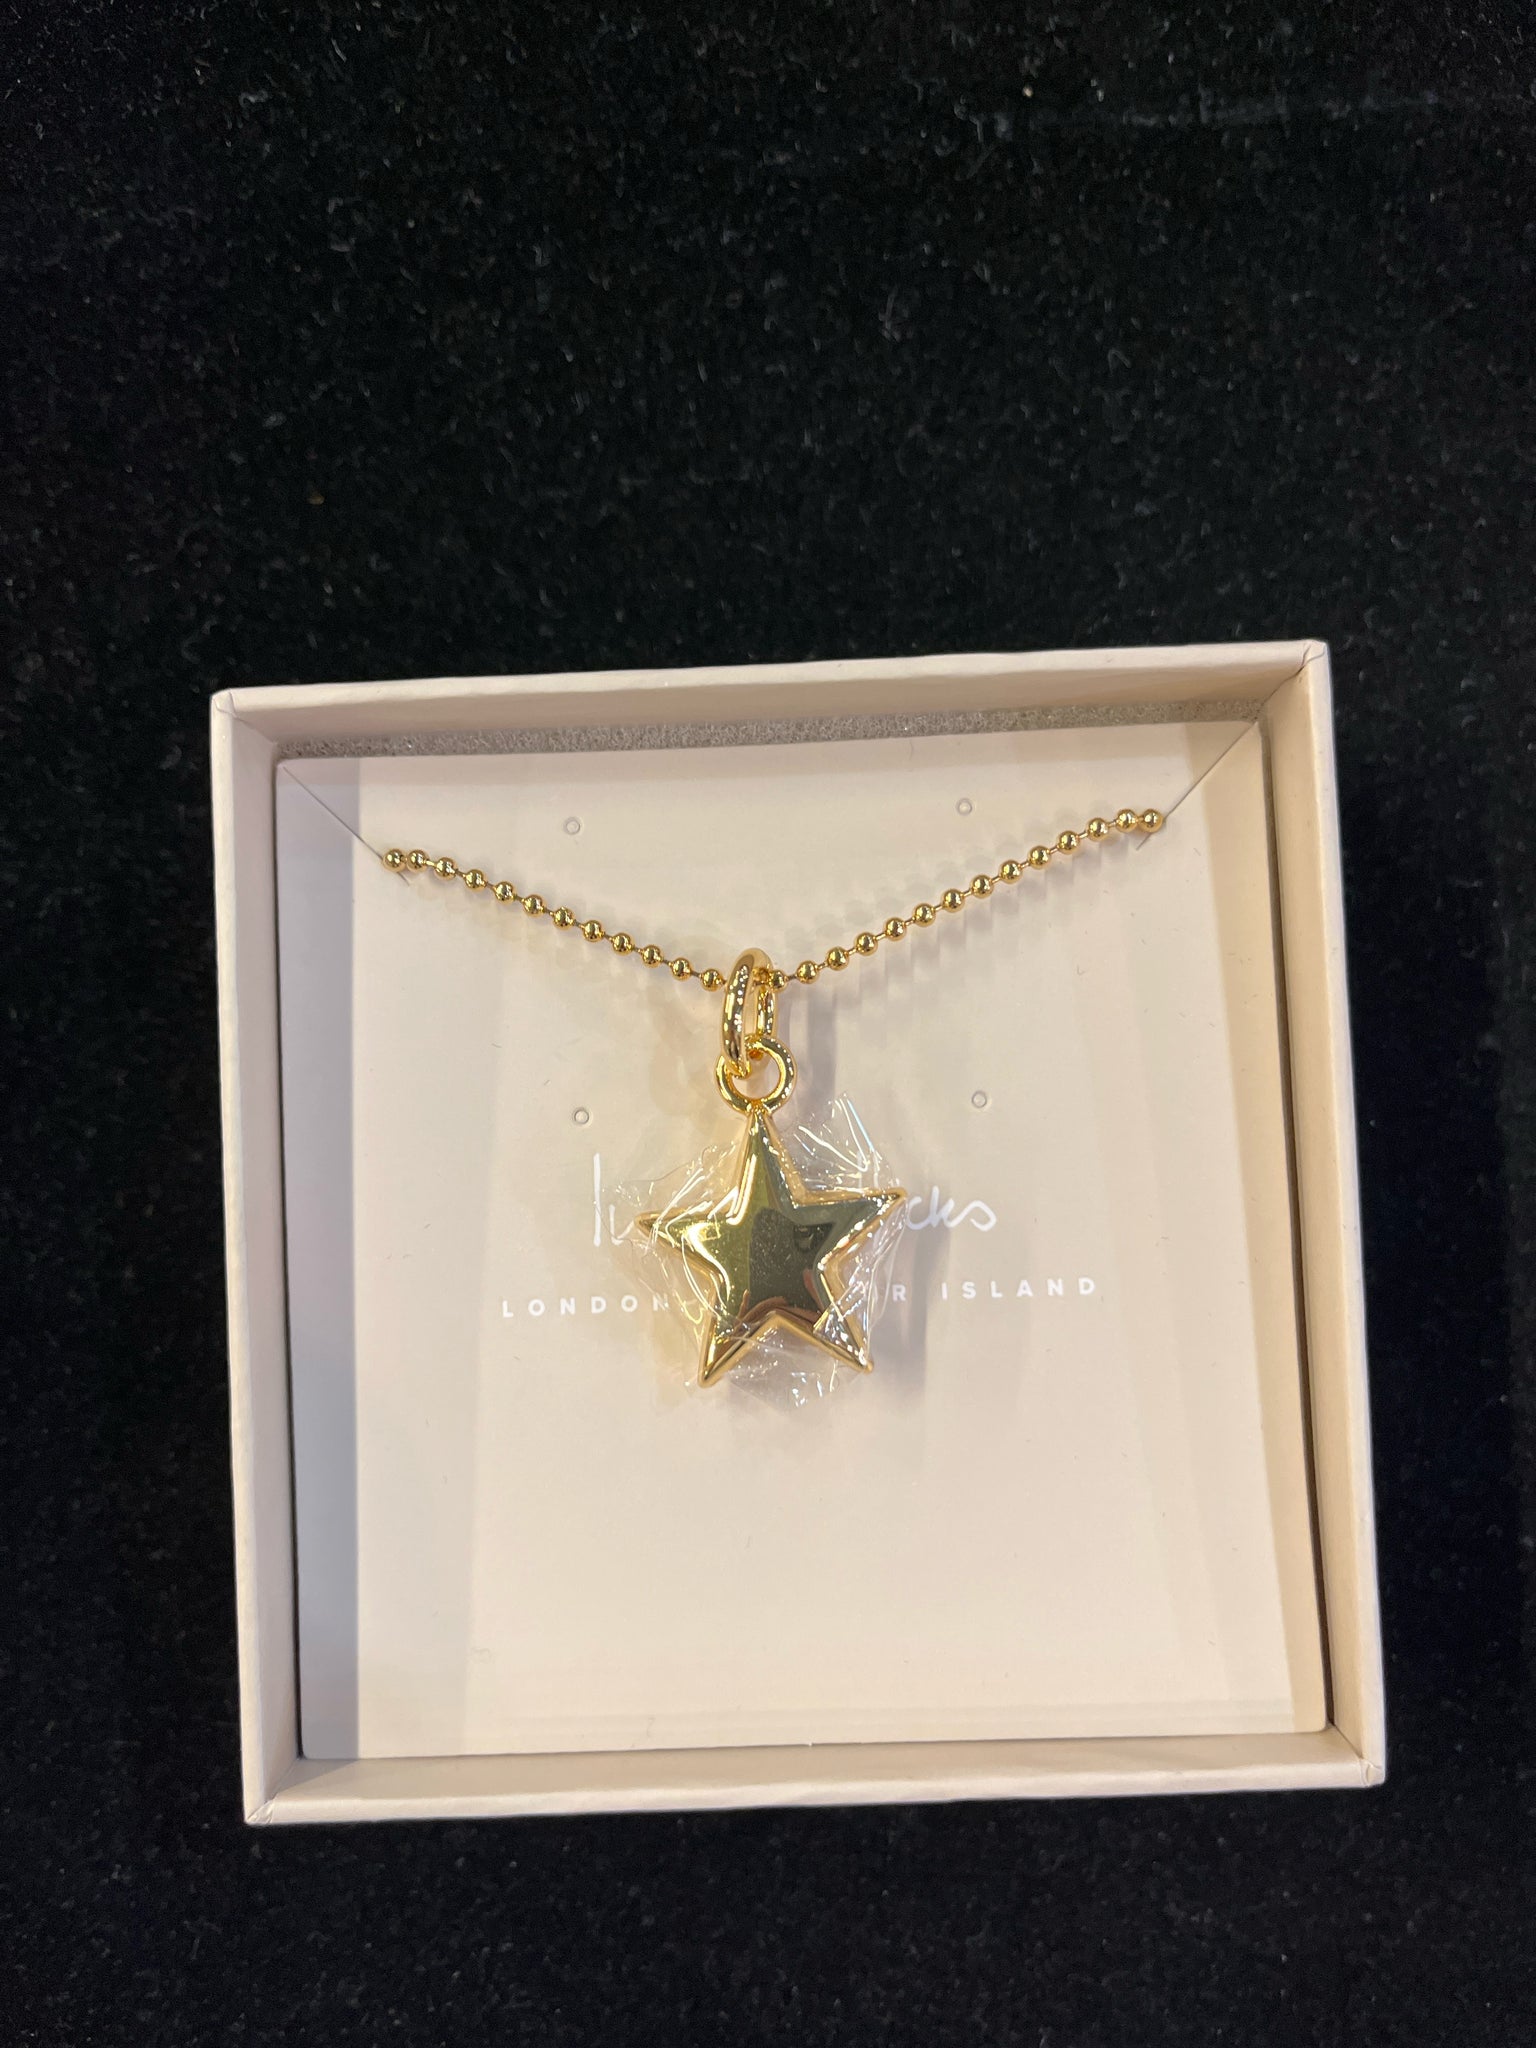 India Hicks Gold Star Pendant Necklace